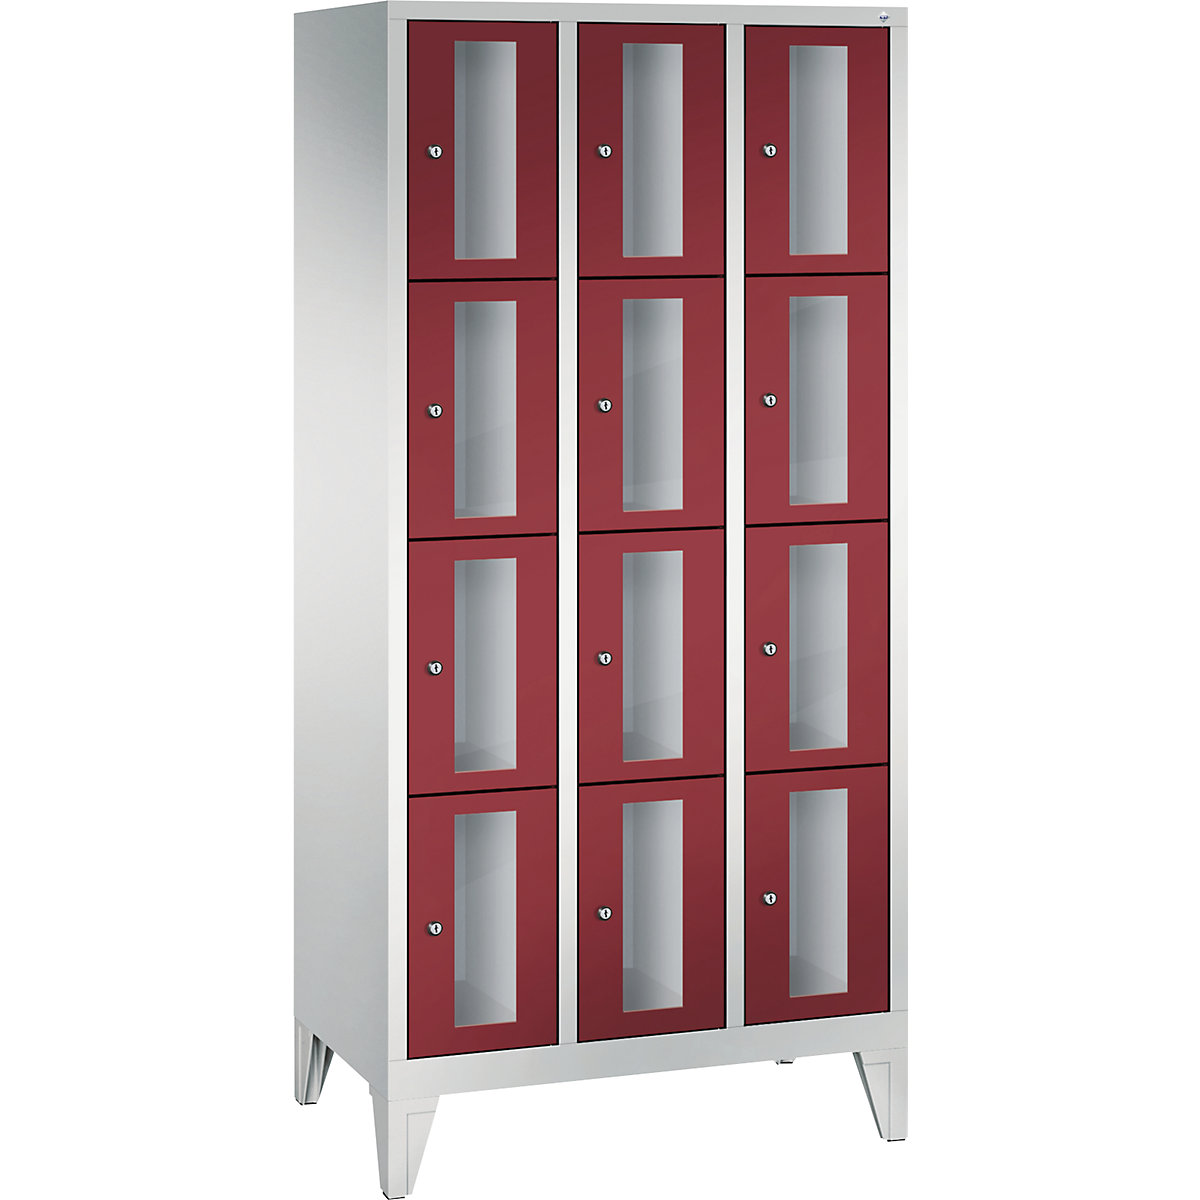 C+P – CLASSIC locker unit, compartment height 375 mm, with feet, 12 compartments, width 900 mm, ruby red door